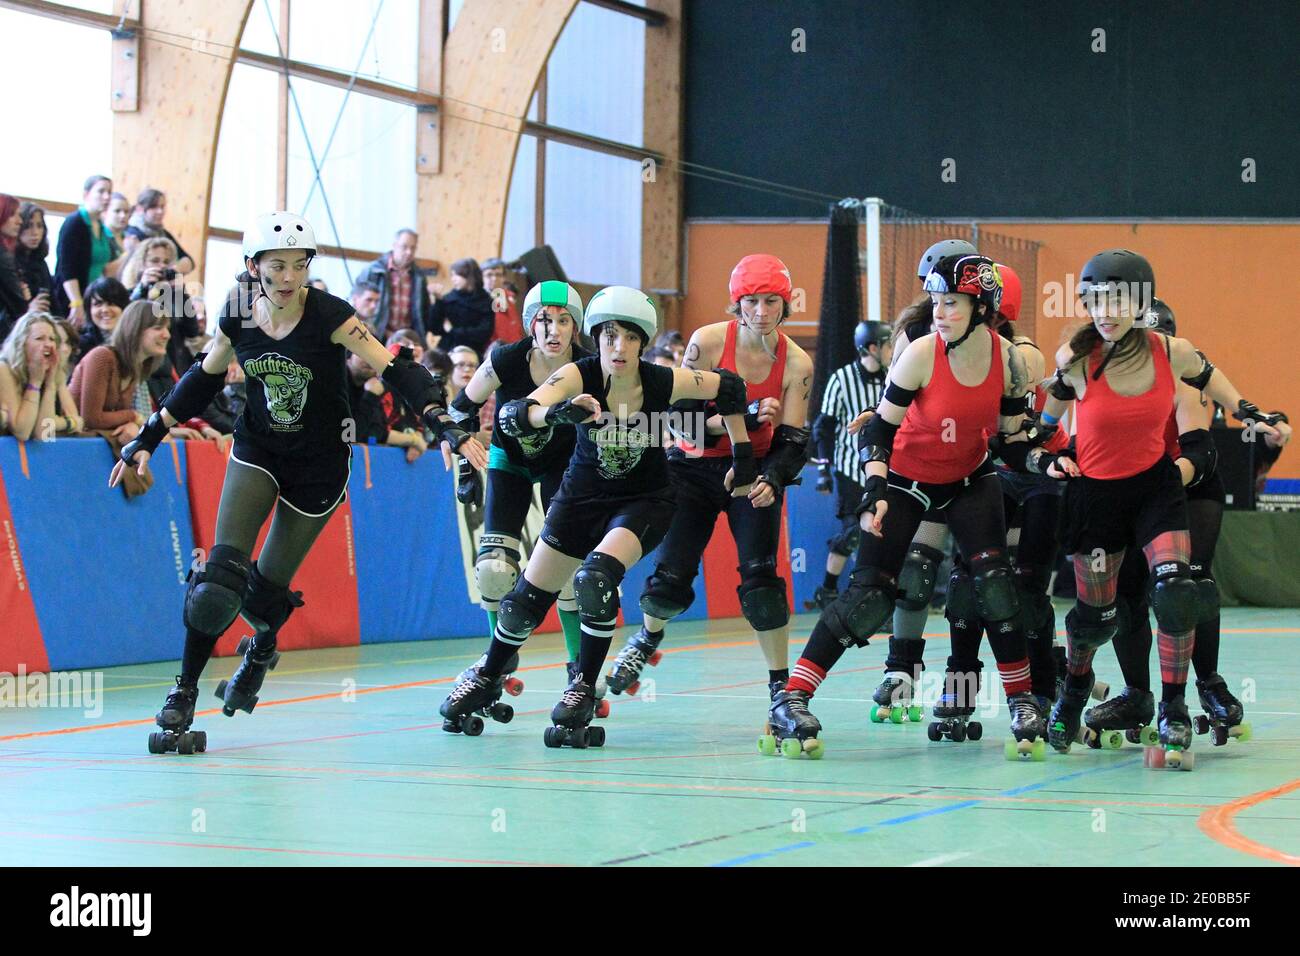 Paris Roller Girls (red) playing a match against Duchesses Nantes Roller Derby  Girls (green) during a national tournament in Nantes, western France on  March 17, 2012. Roller Derby is an American-invented contact